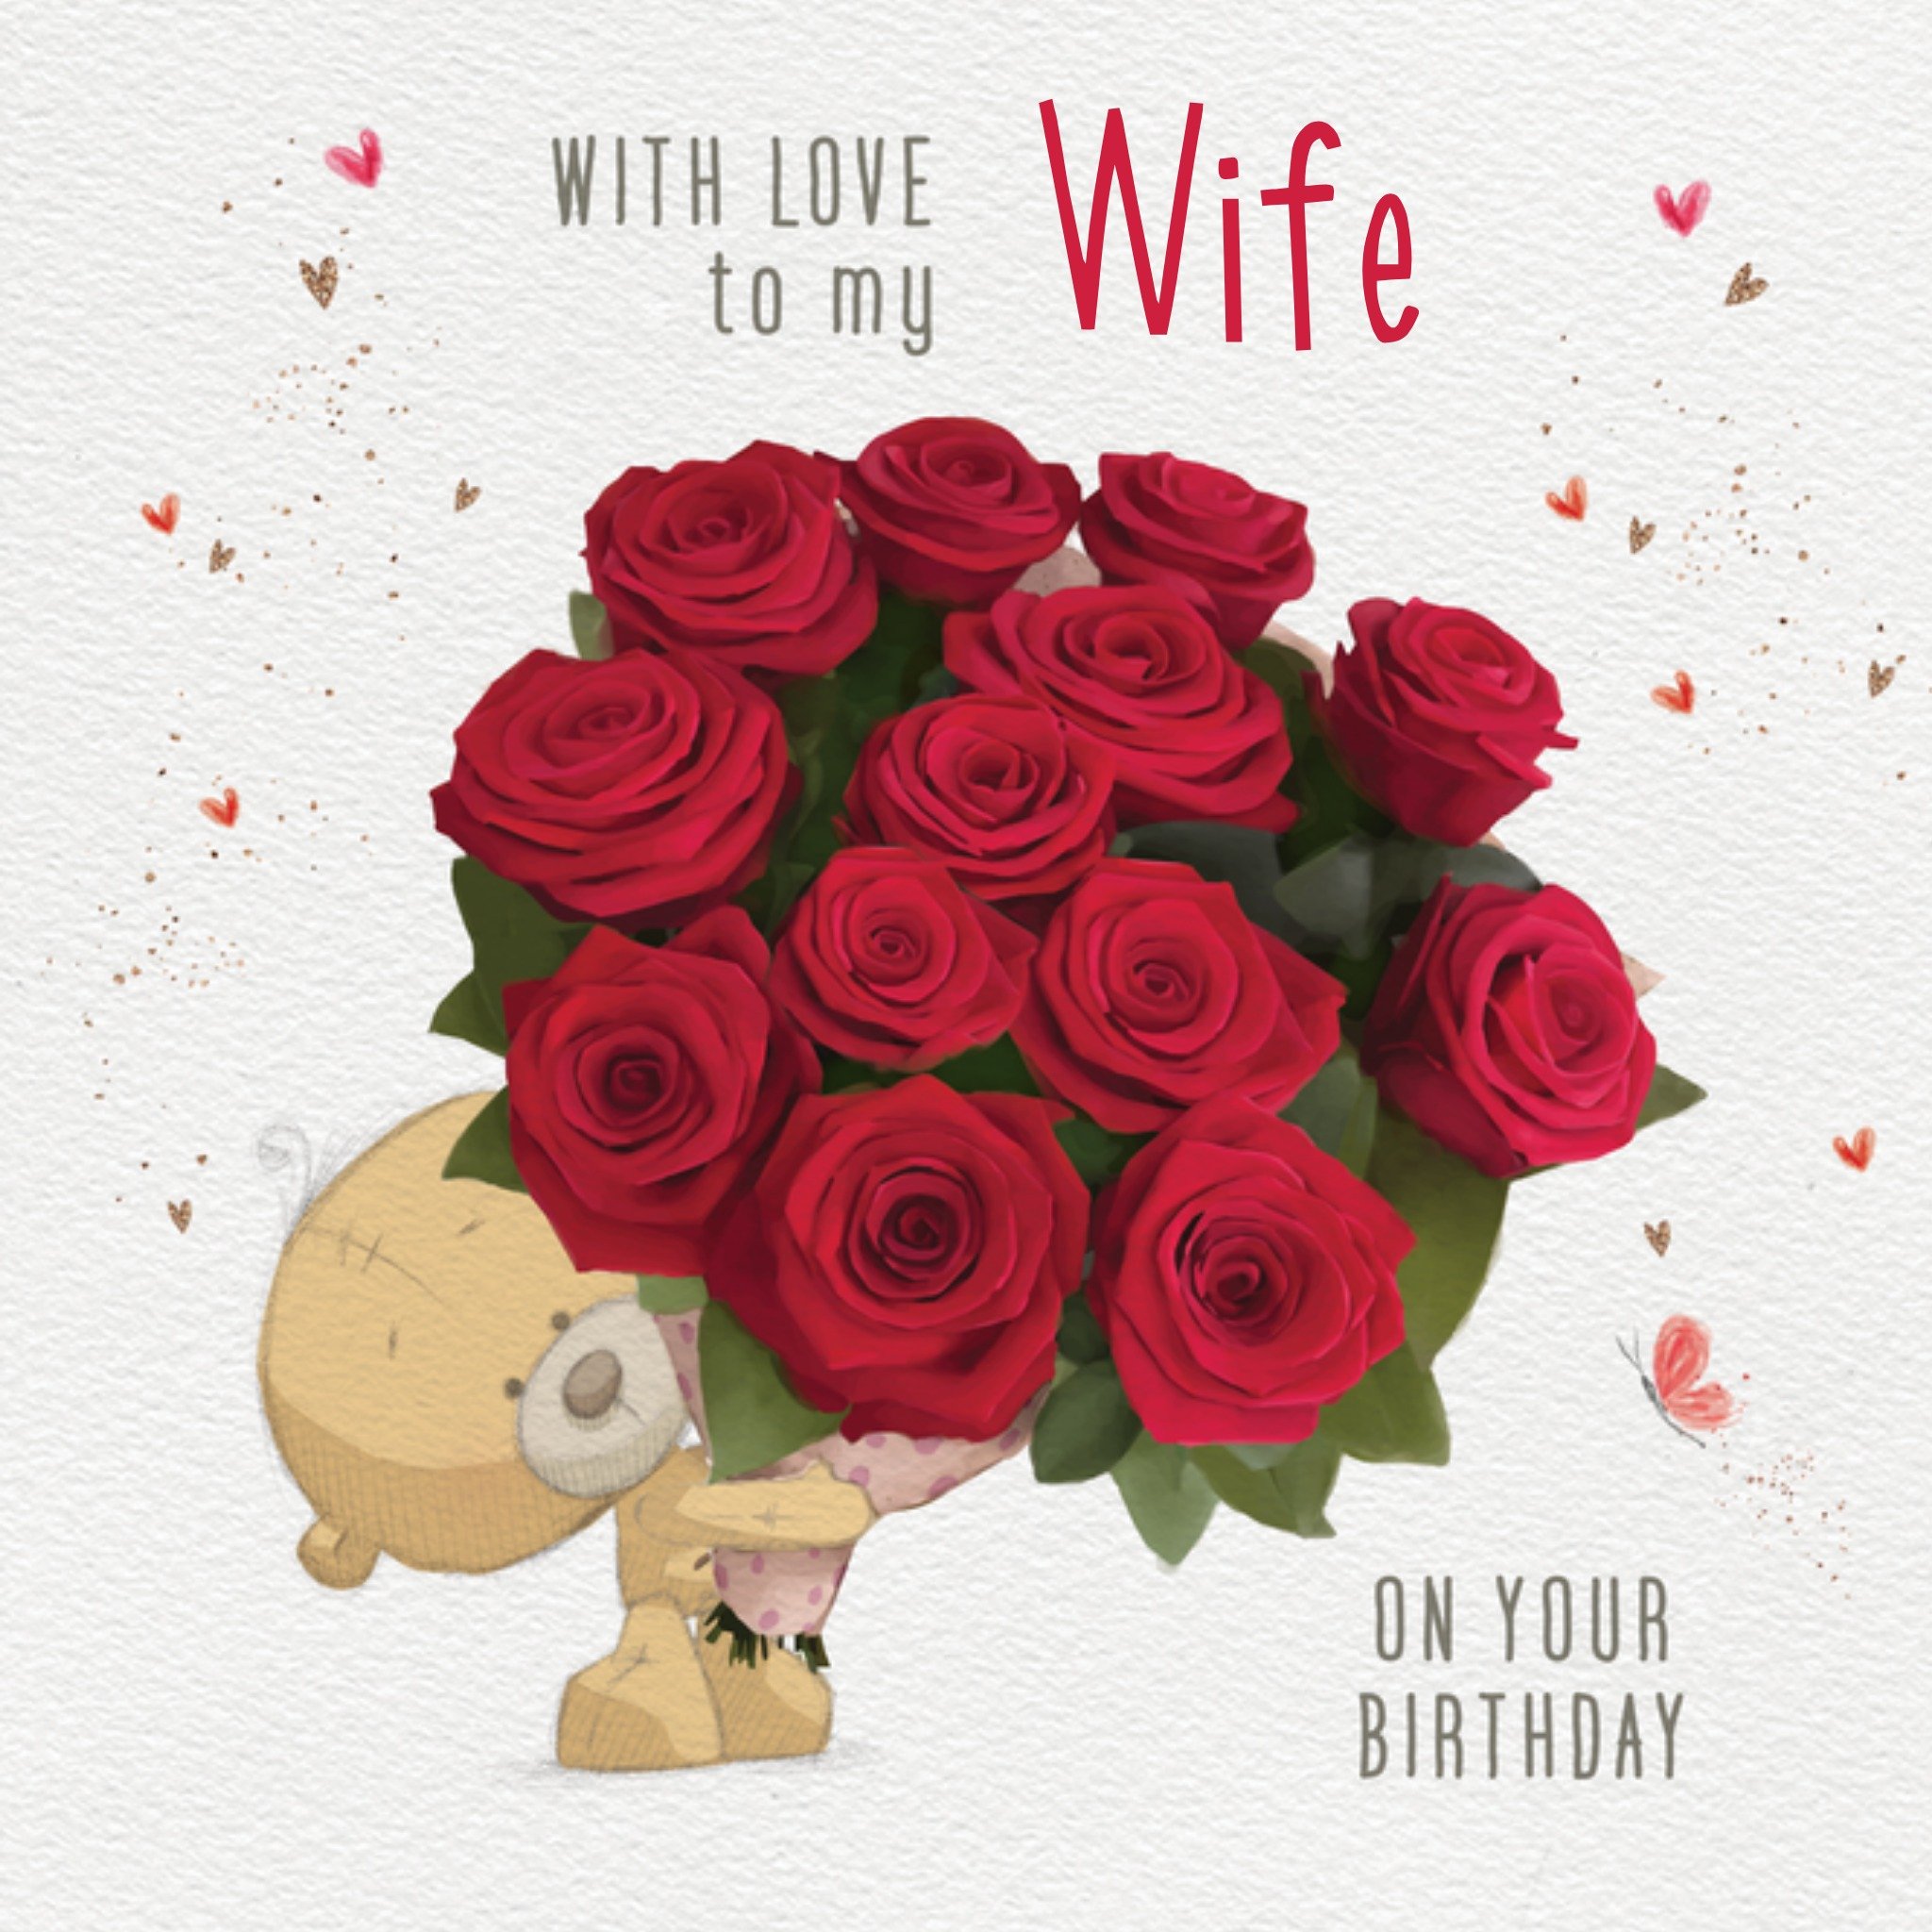 Moonpig Uddle With Love To My Wife Illustrated Teddy With Bouquet Of Roses Birthday Card, Large